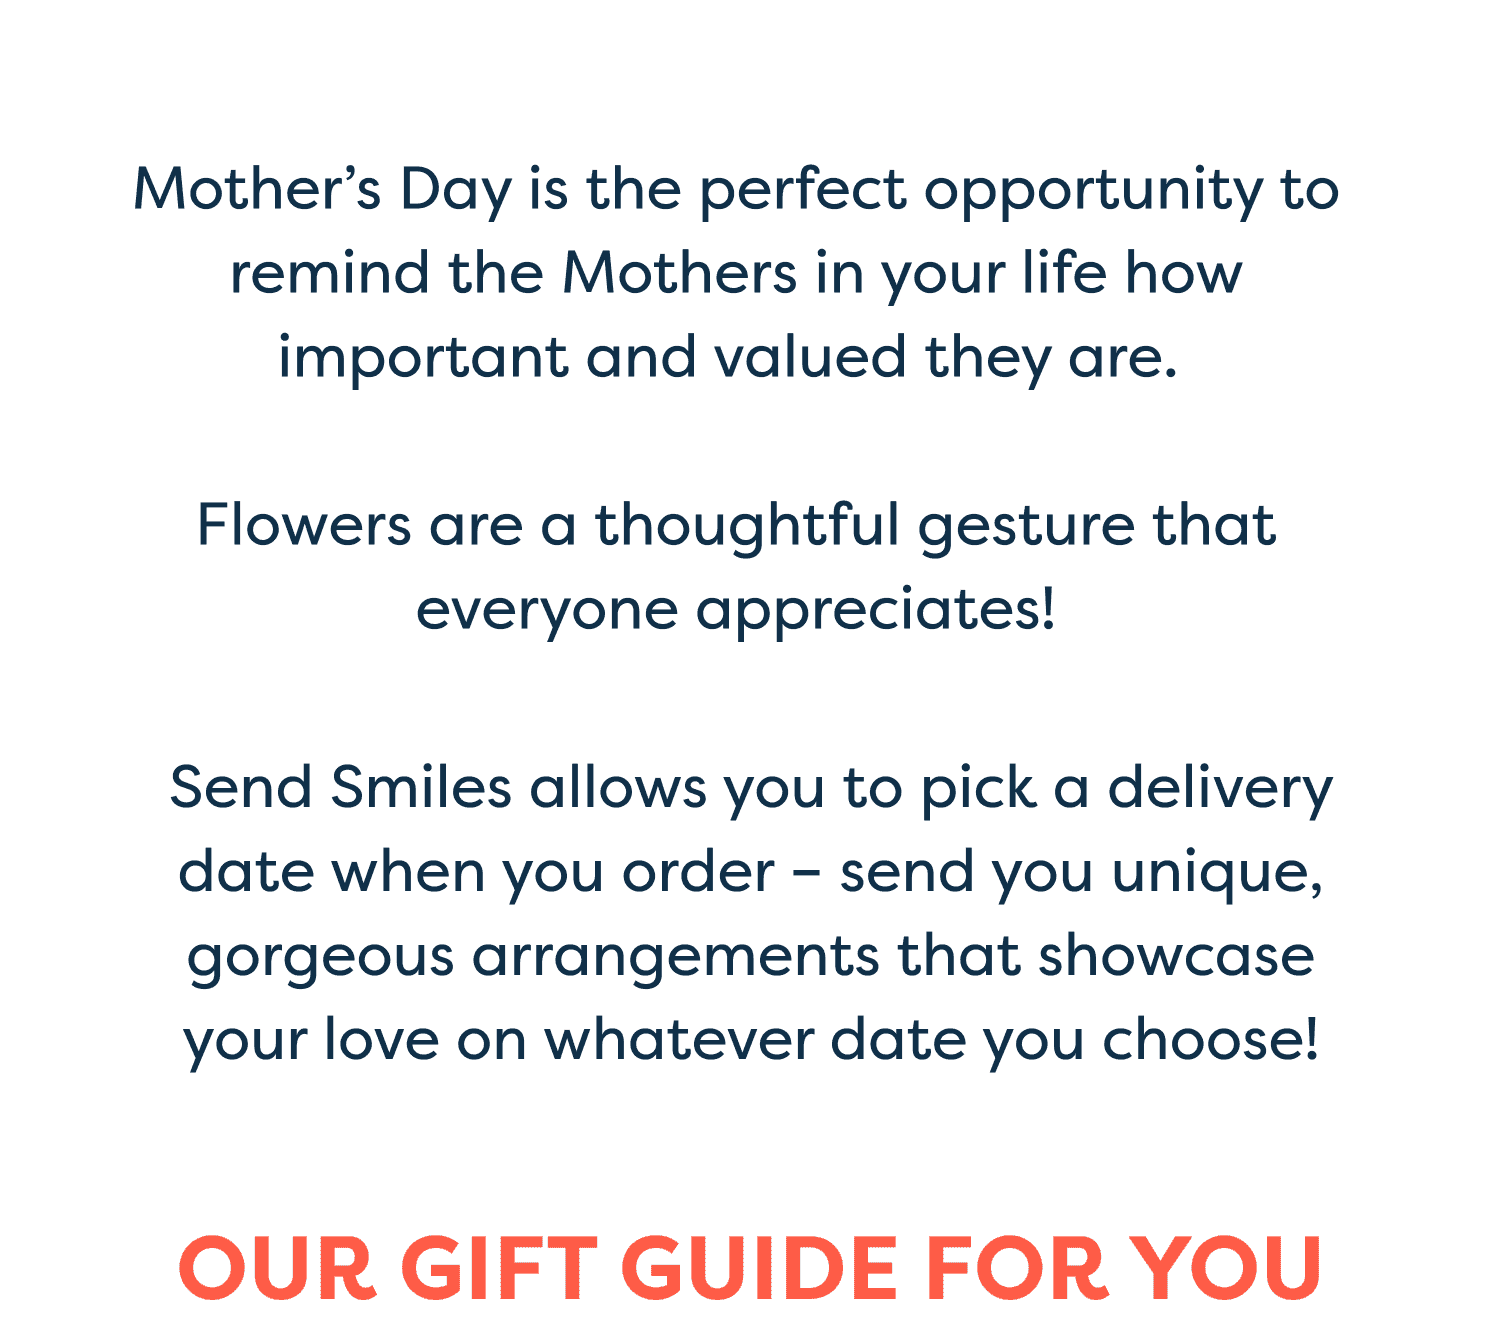 Mother’s Day is the perfect opportunity to remind the Mothers in your life how important and valued they are. Flowers are a thoughtful gesture that everyone appreciates! Send Smiles allows you to pick a delivery date when you order – send you unique, gorgeous arrangements that showcase your love on whatever date you choose! Our Gift Guide for You